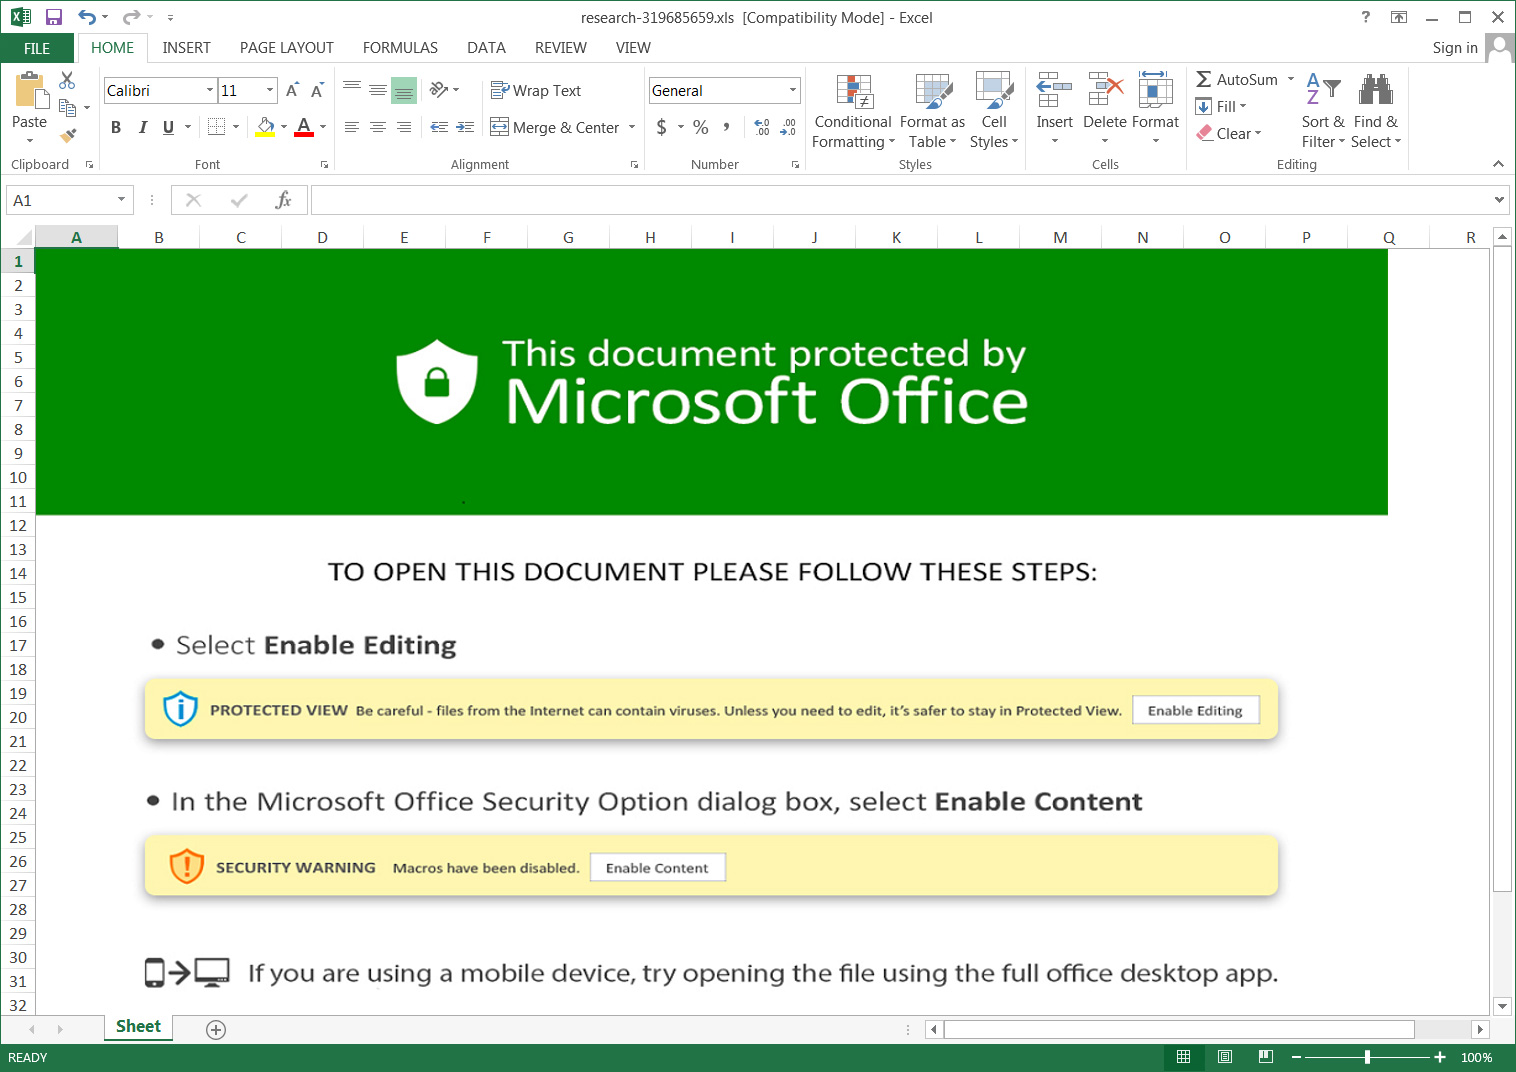 Excel attachment used in the phishing campaign